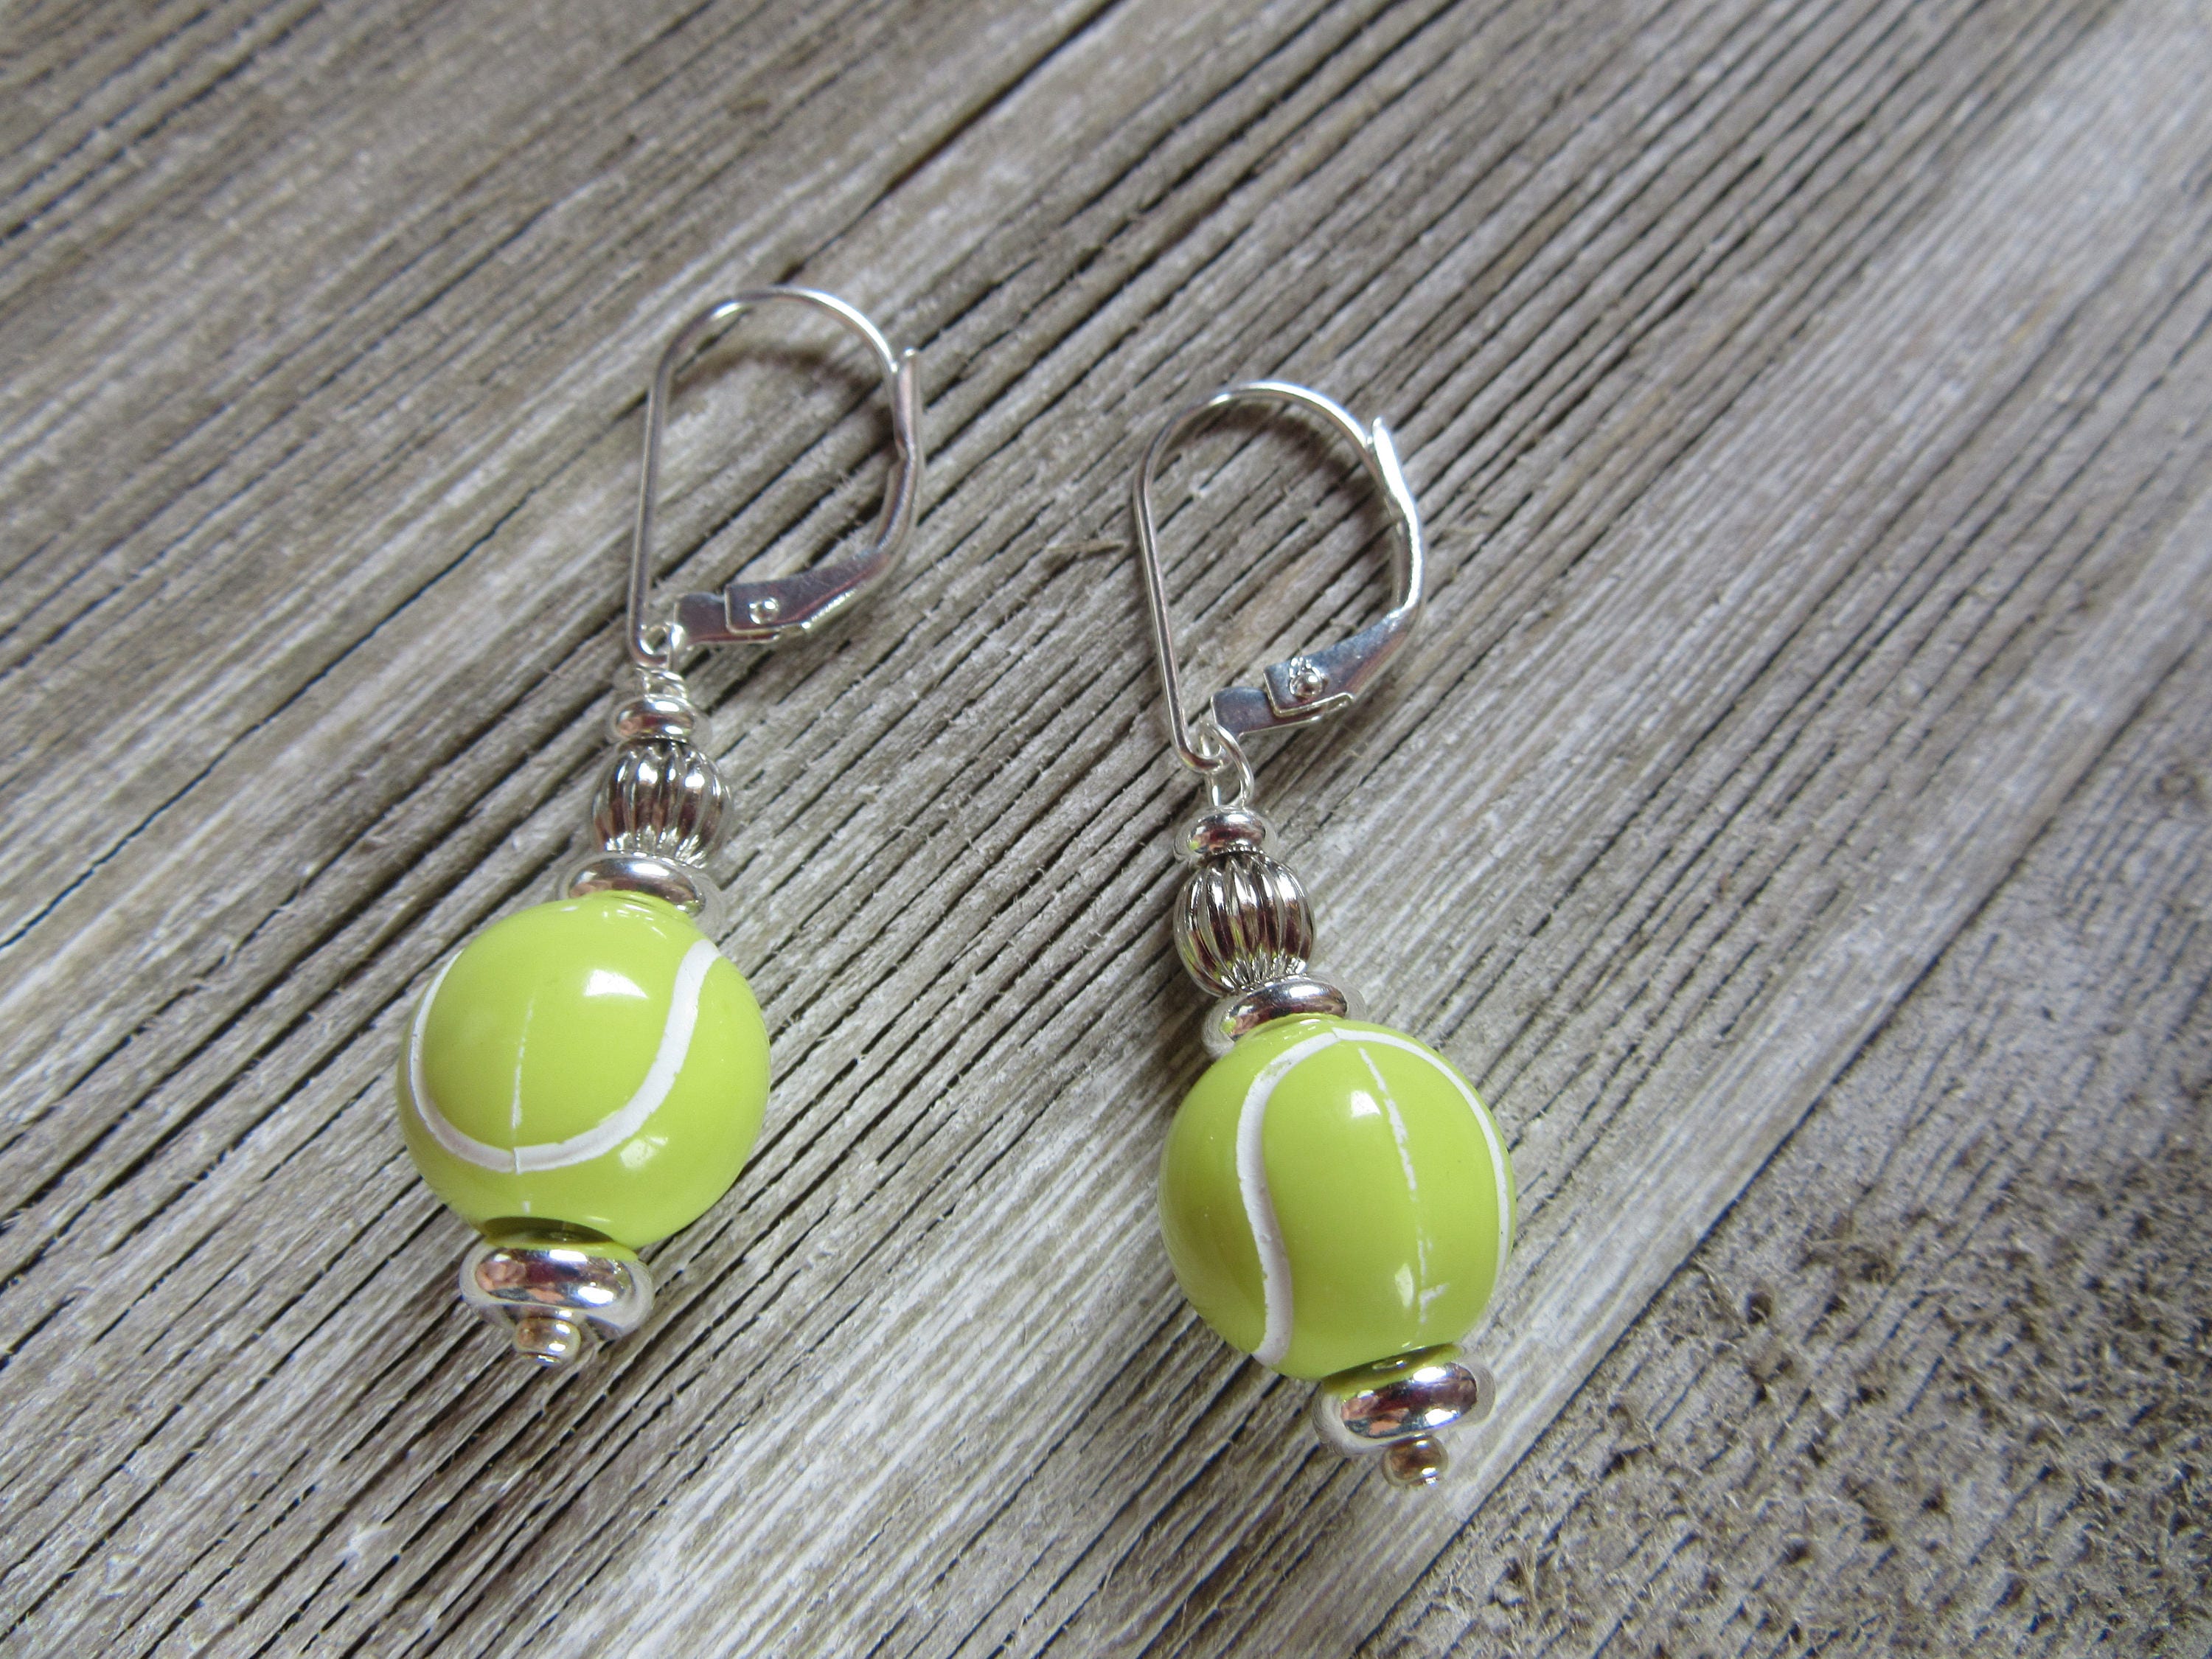 TENNIS BALL EARRINGS, Gift for Tennis Player, Woman's Jewelry, Tennis Pro  Bling, Fun Novelty Sports Earrings, Tennis Tournament Jewelry 